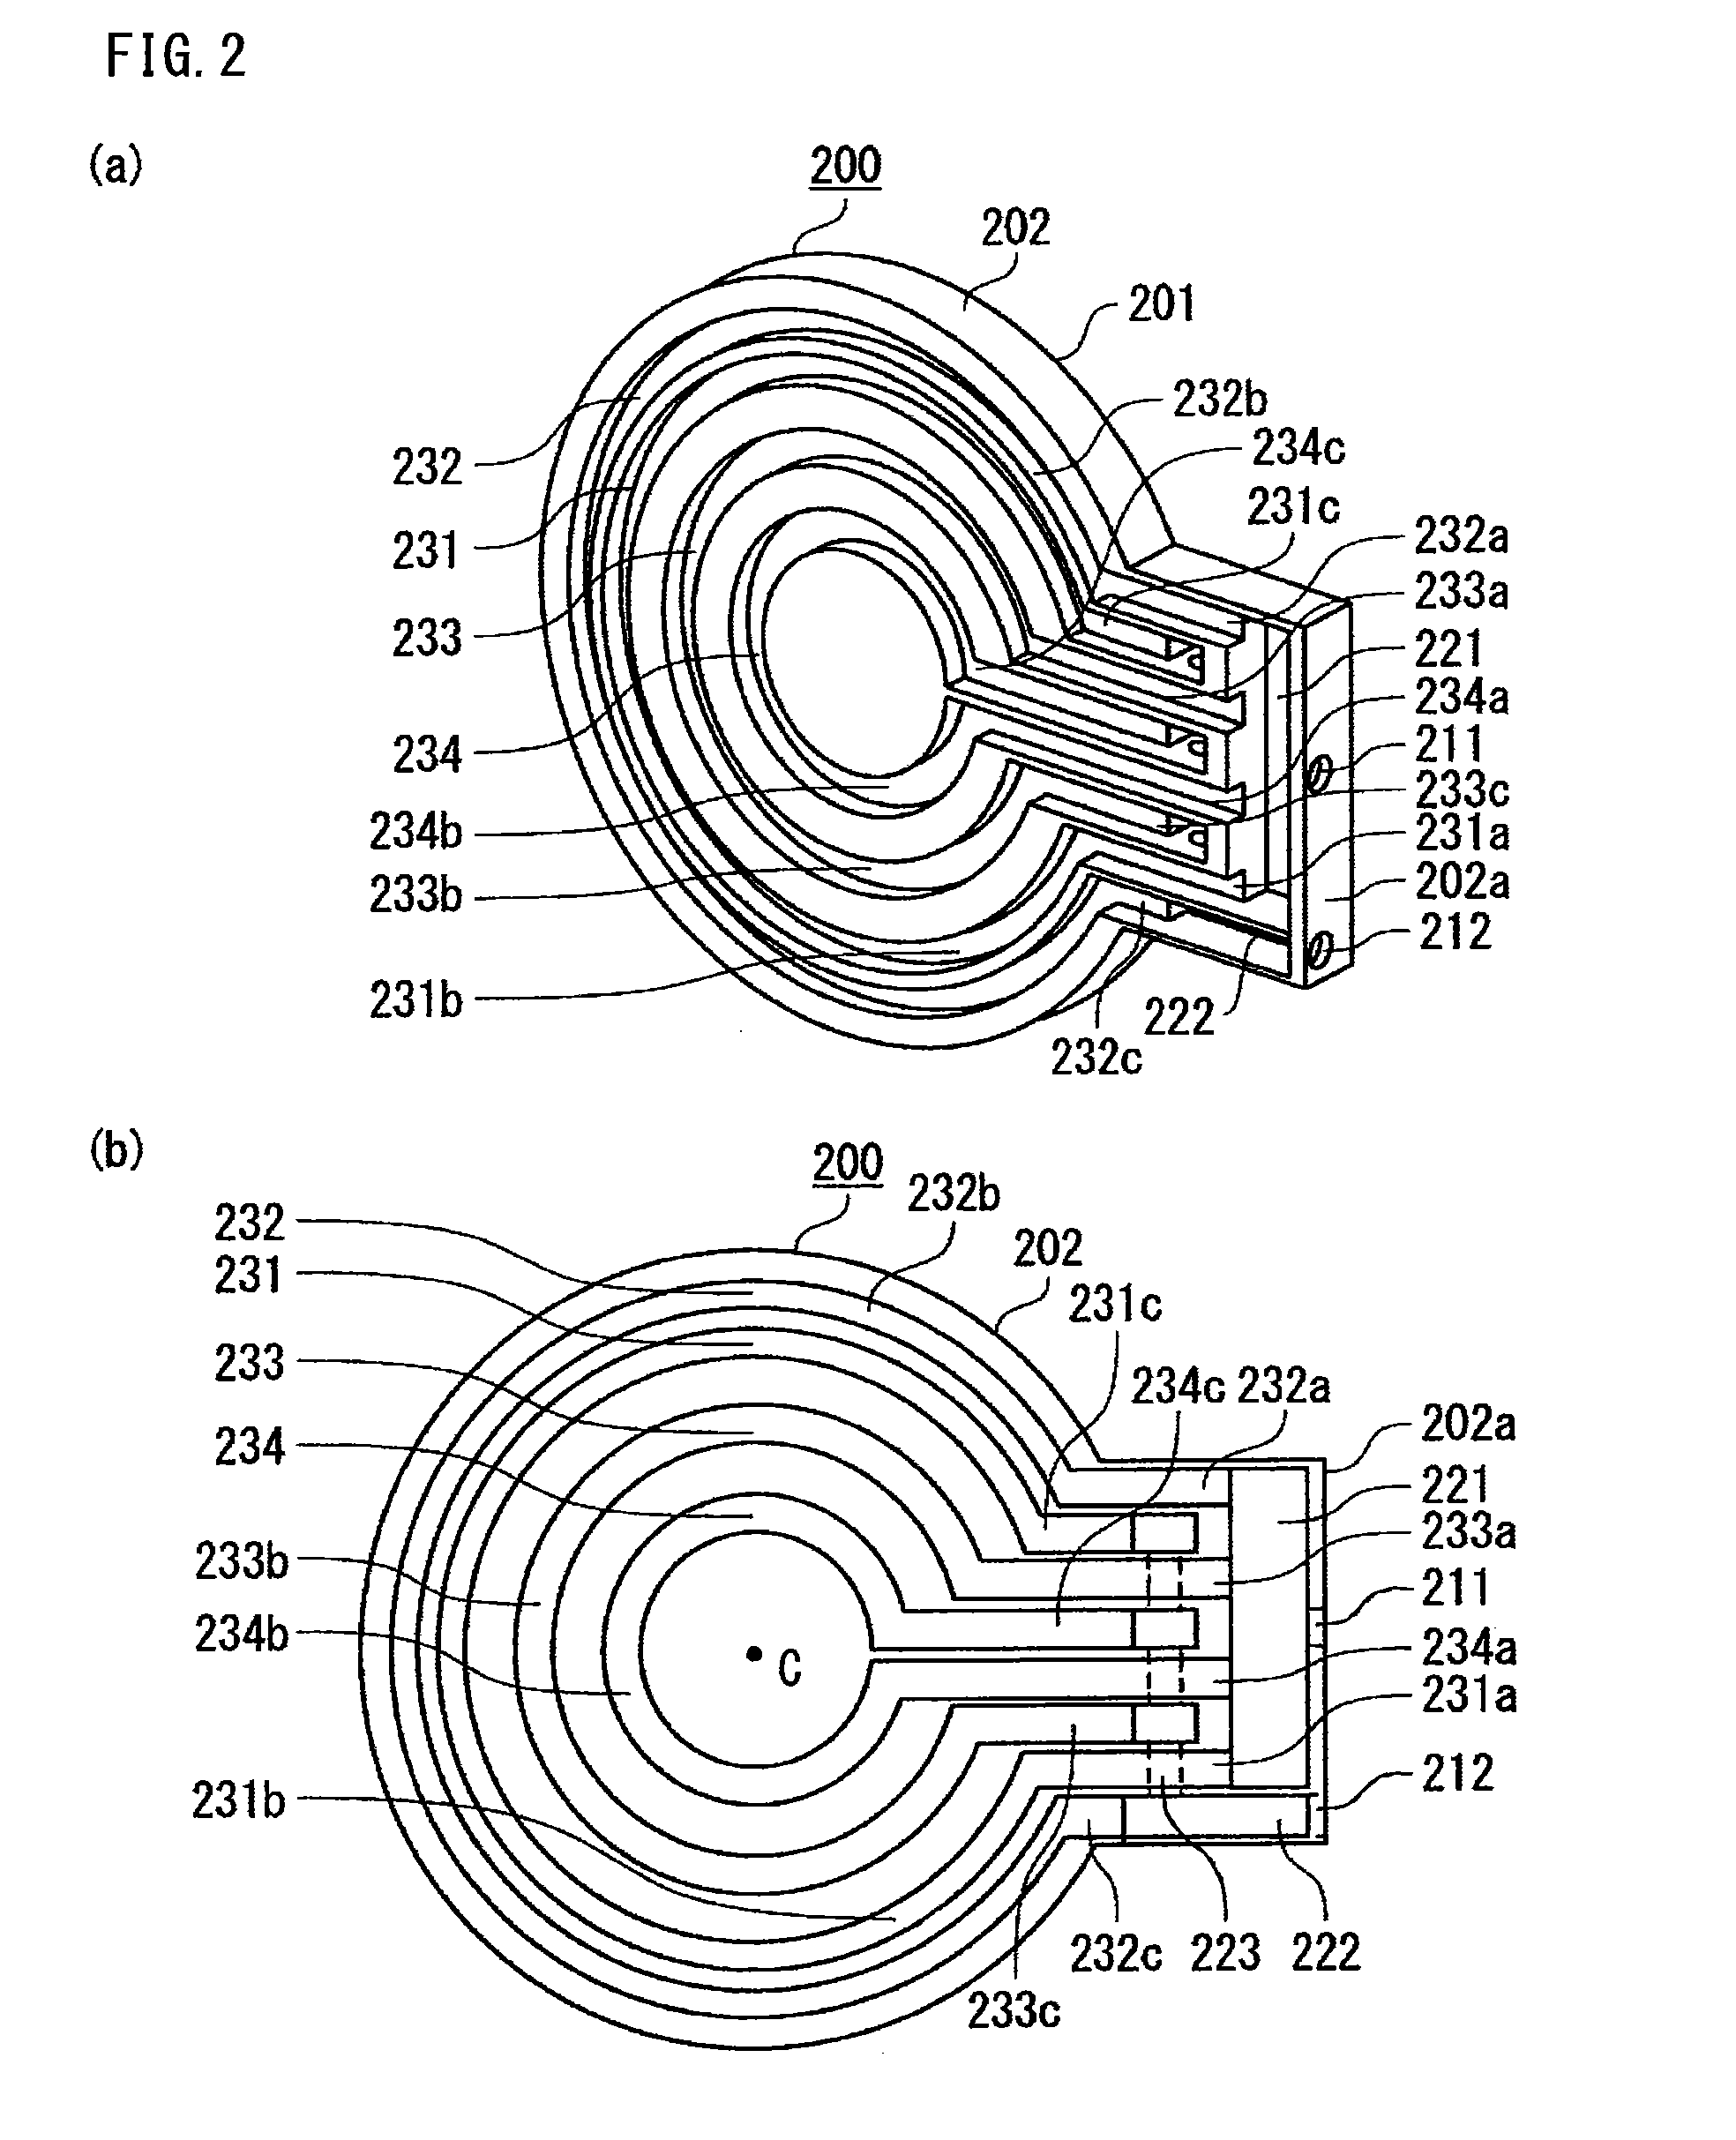 Cooler and motor-integrated power conversion apparatus